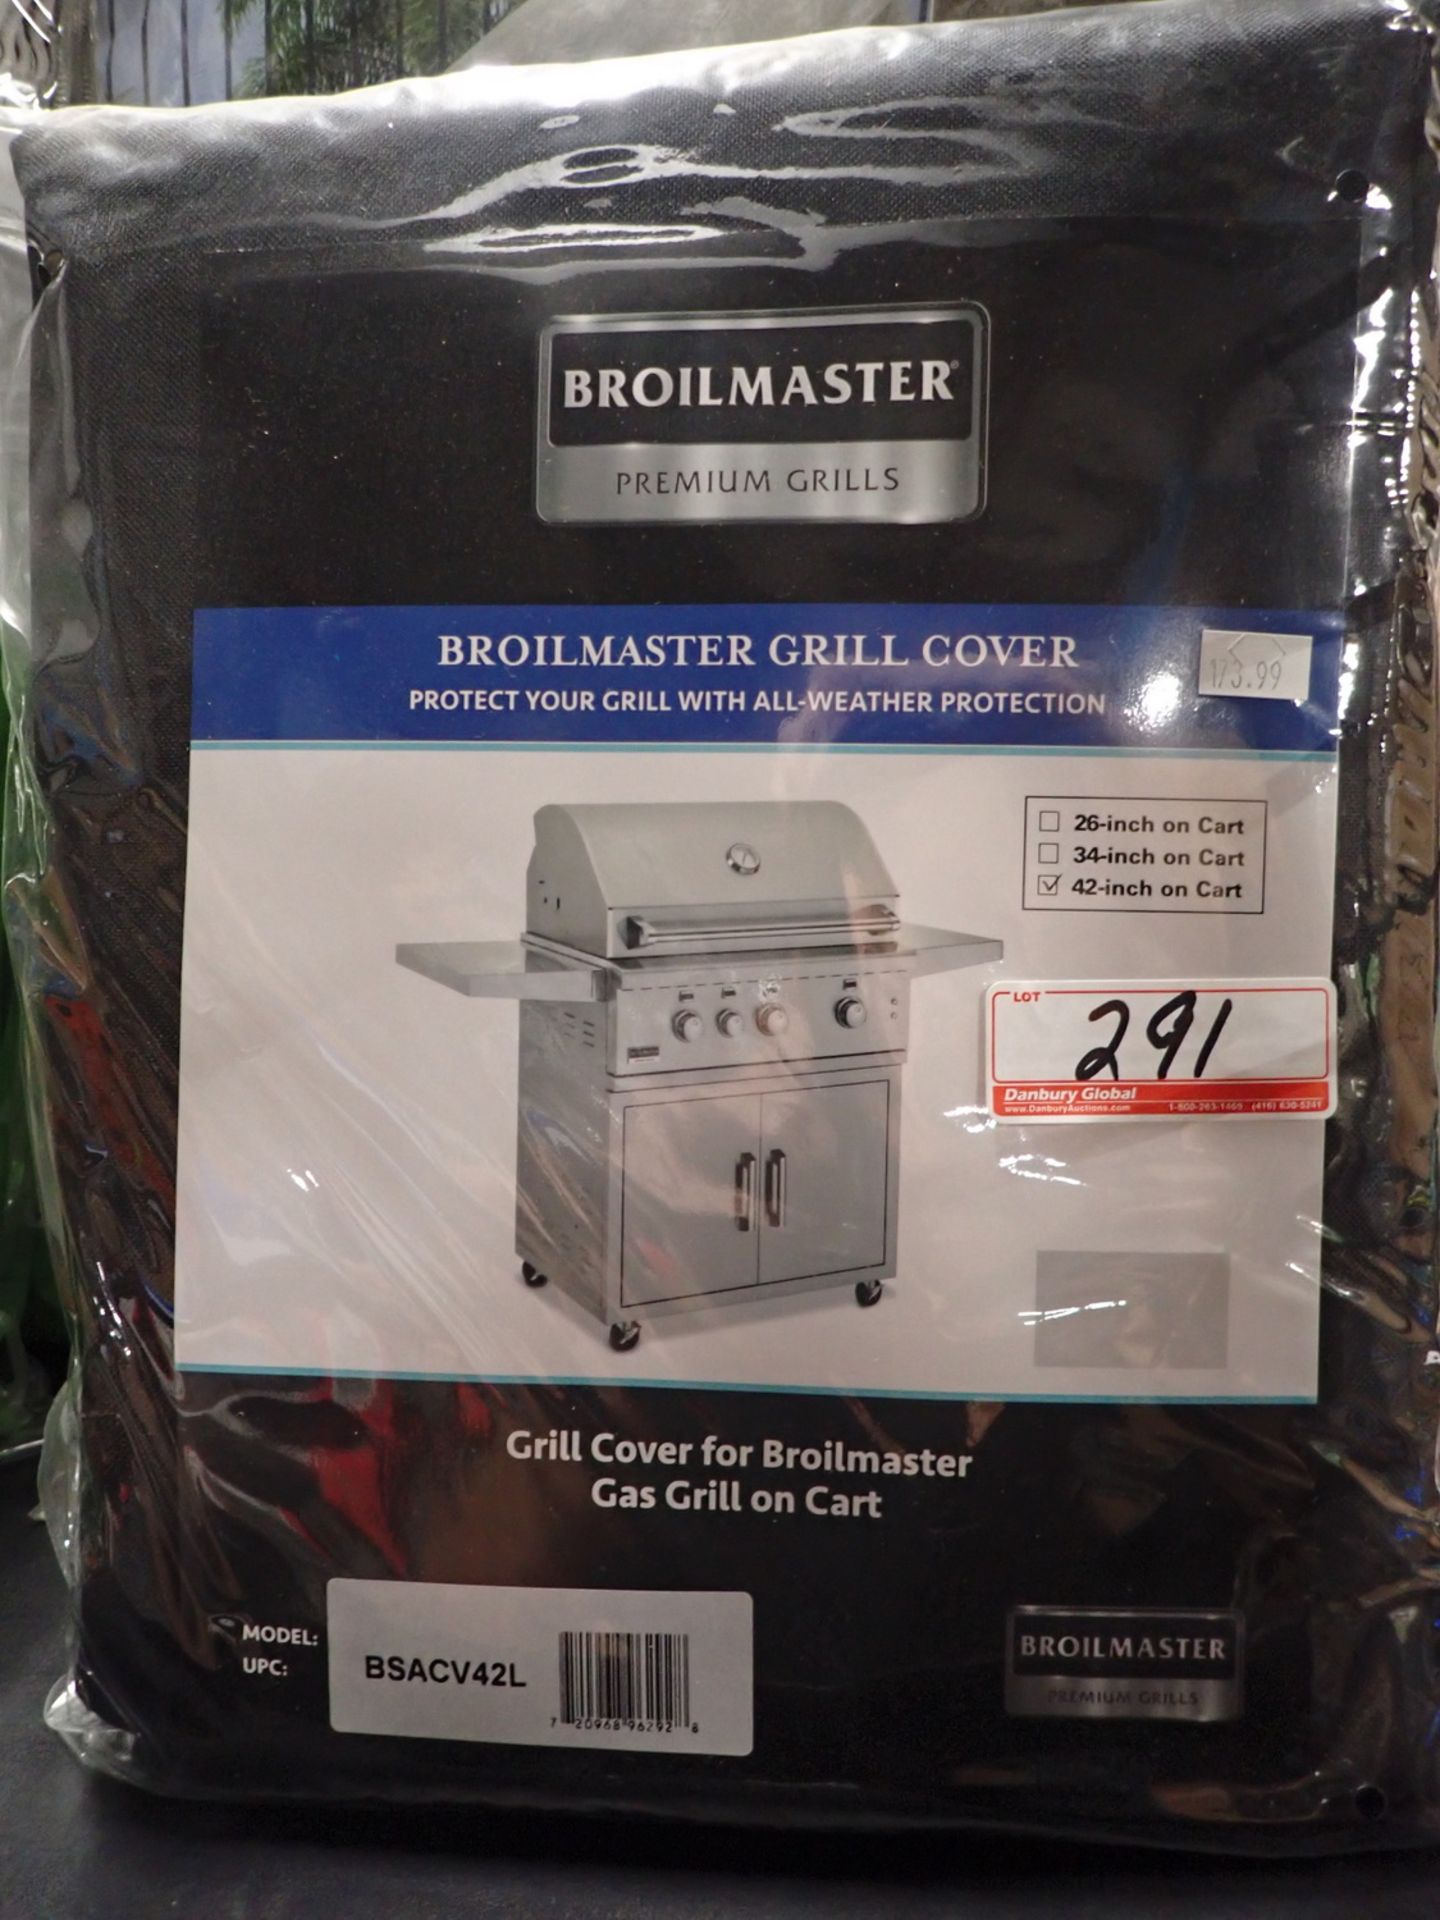 UNITS - BROILMASTER GRILL COVER FOR 42" ON CART (RETAIL $173.99 EA)